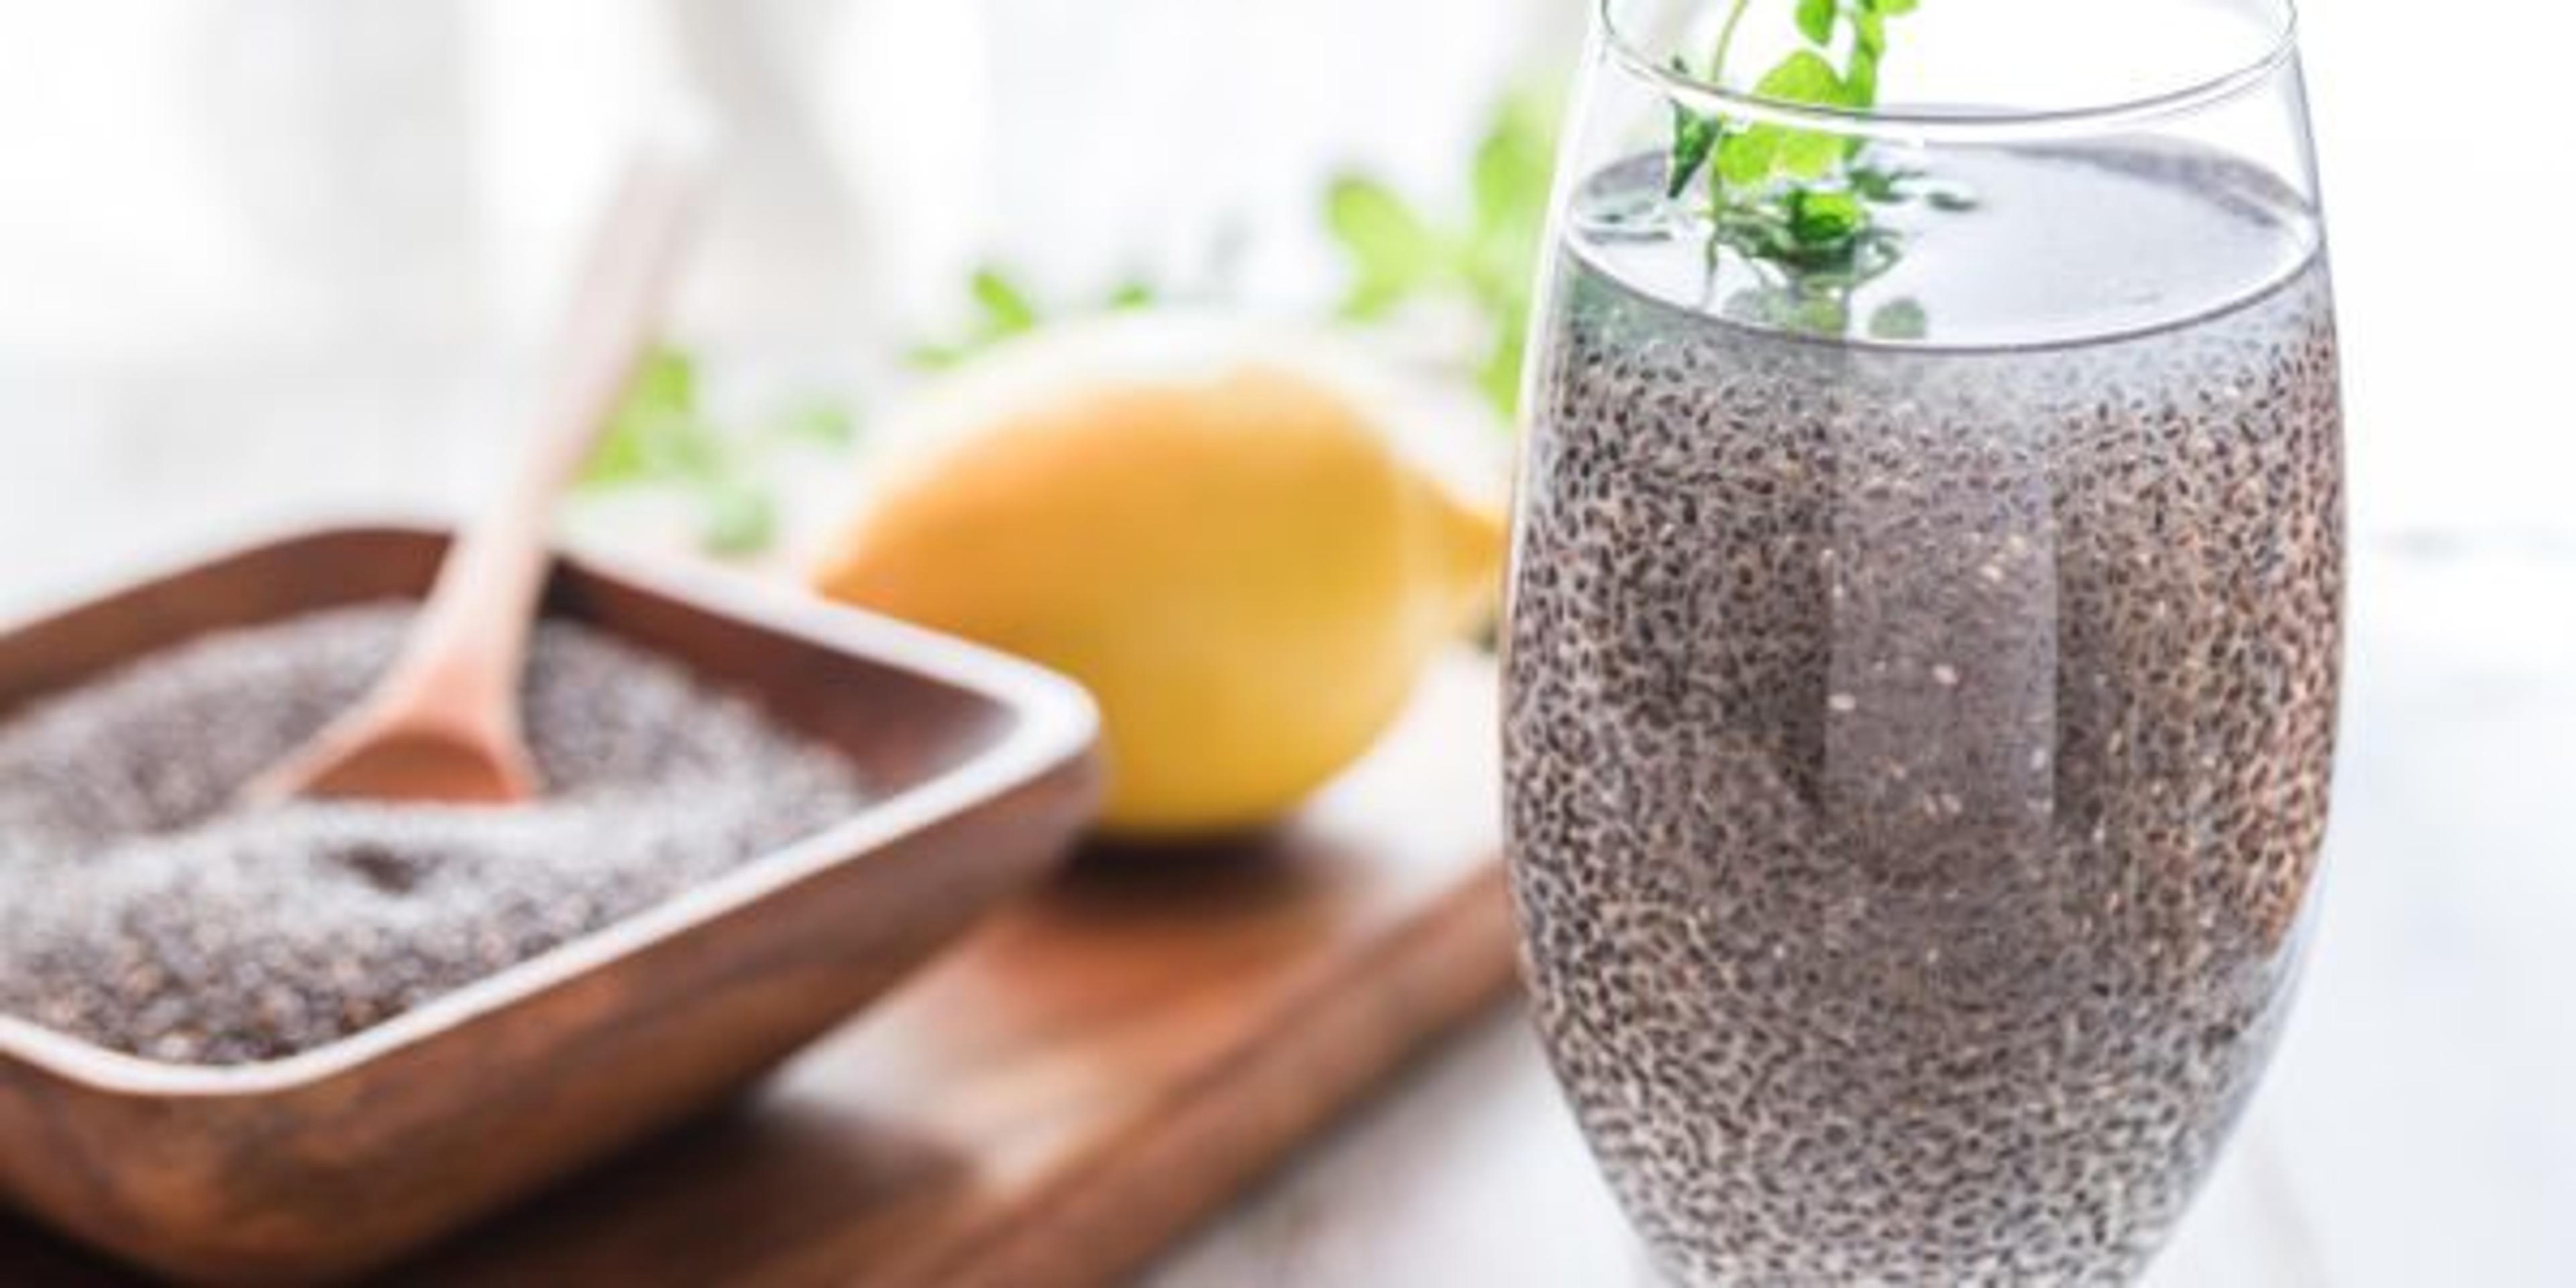 Chia seed drink in glass